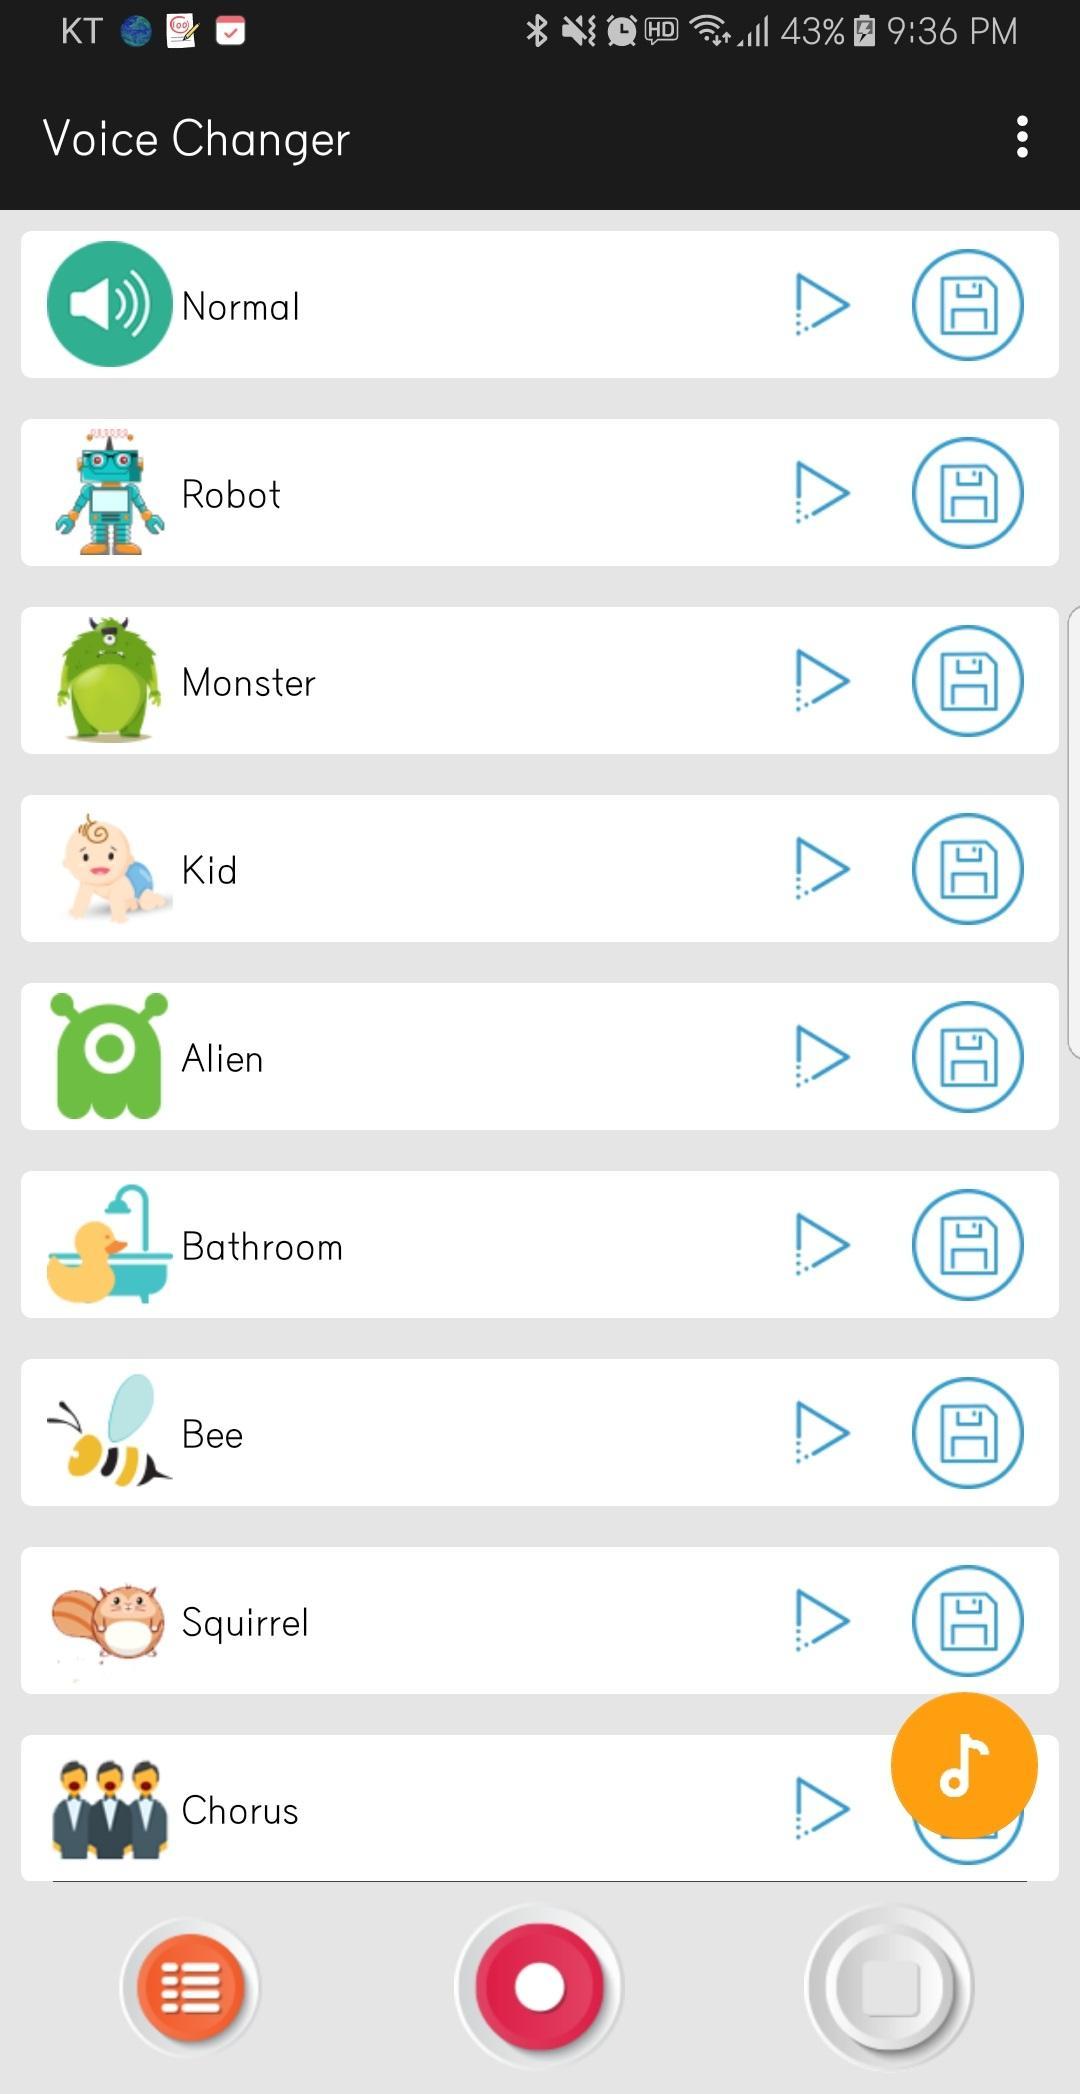 Hacking Voice Voice Changer for Android APK Download